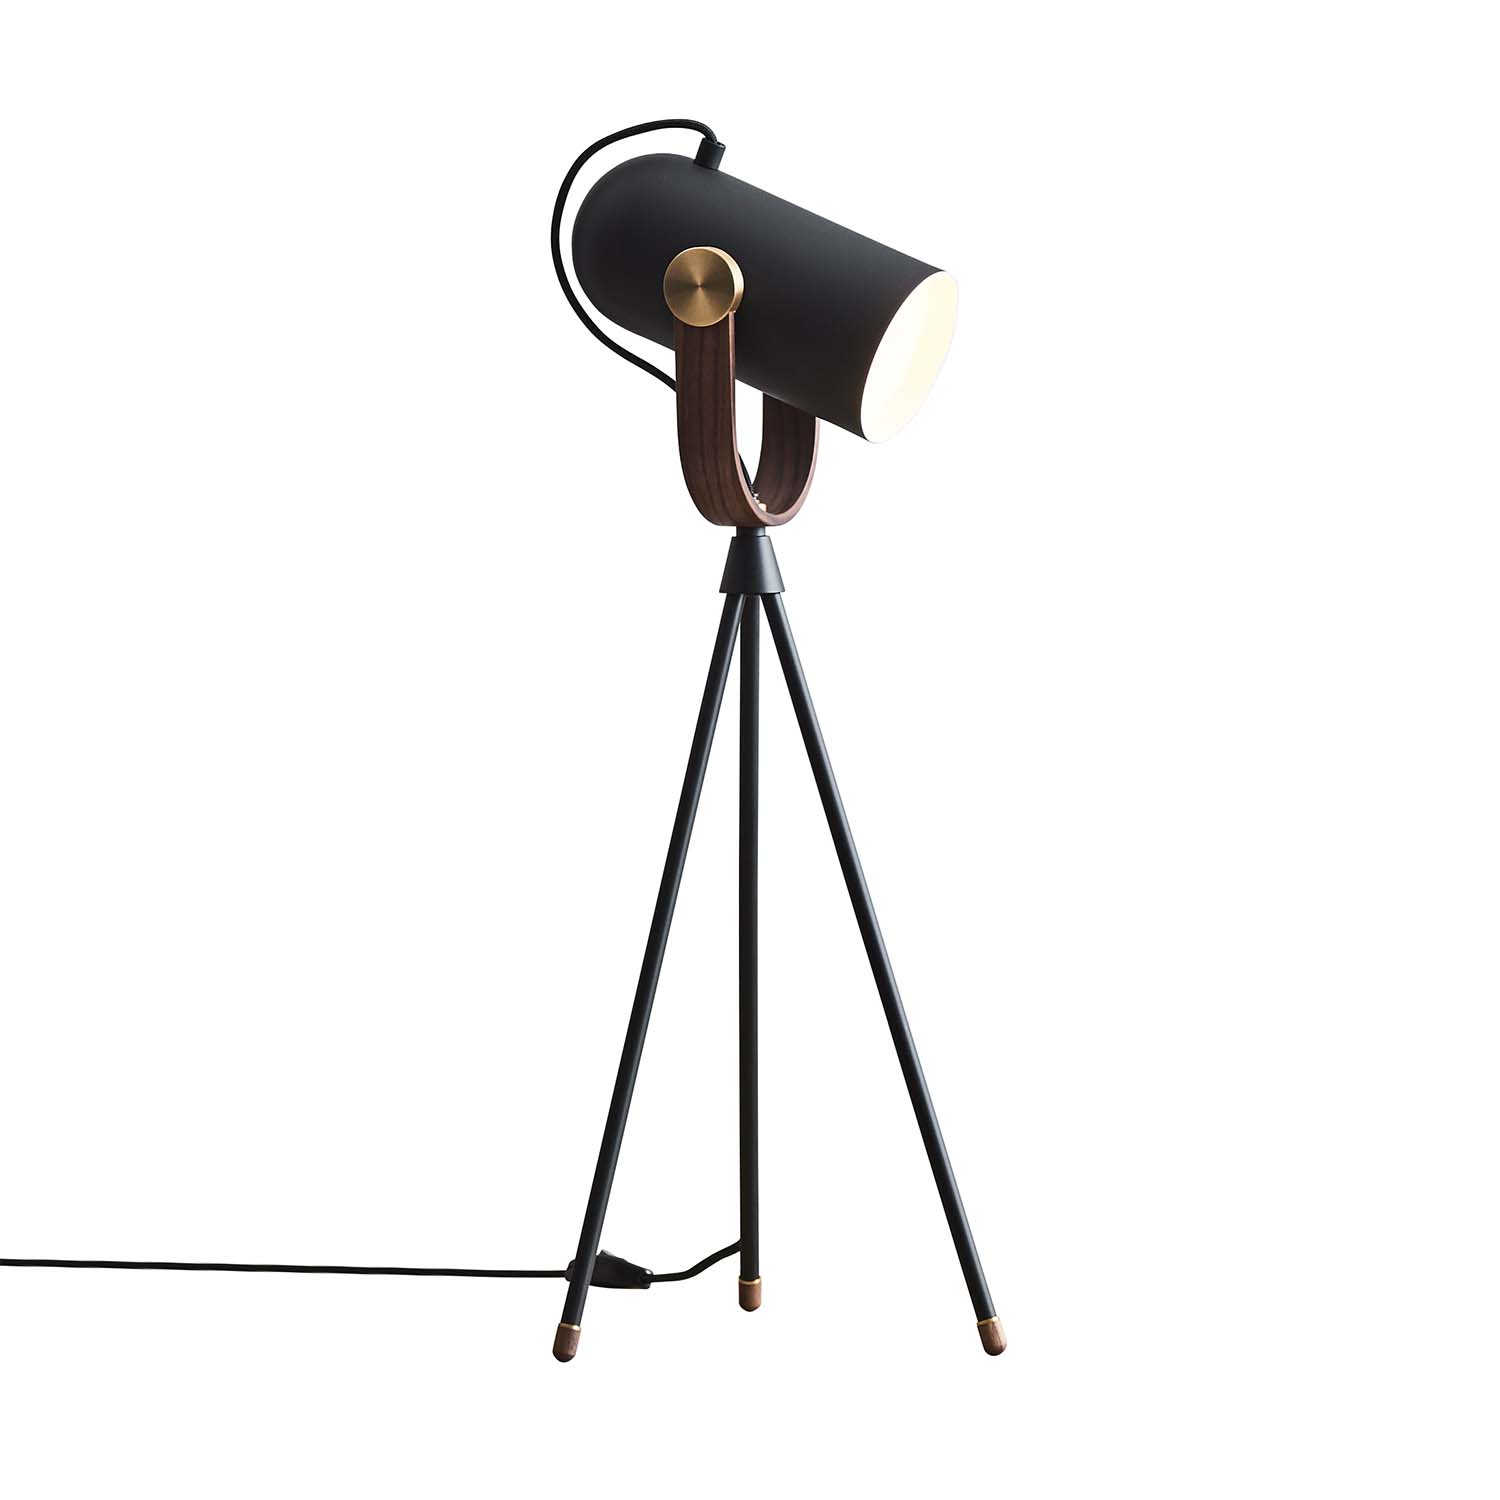 CARRONADE High Table - Vintage and industrial projector desk lamp